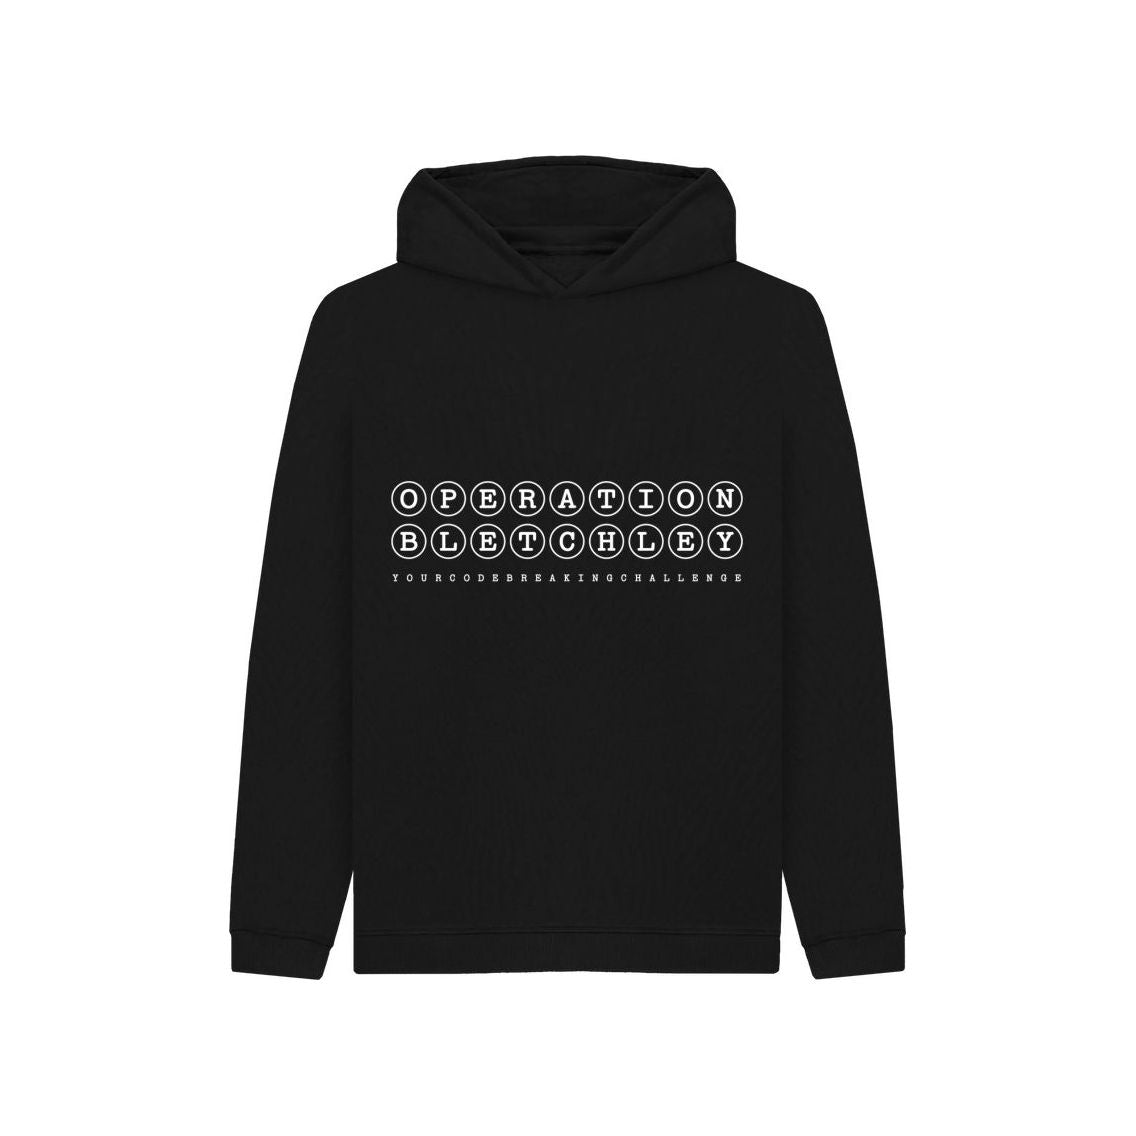 Operation Bletchley kids unisex hoodie - ABF The Soldiers' Charity Shop